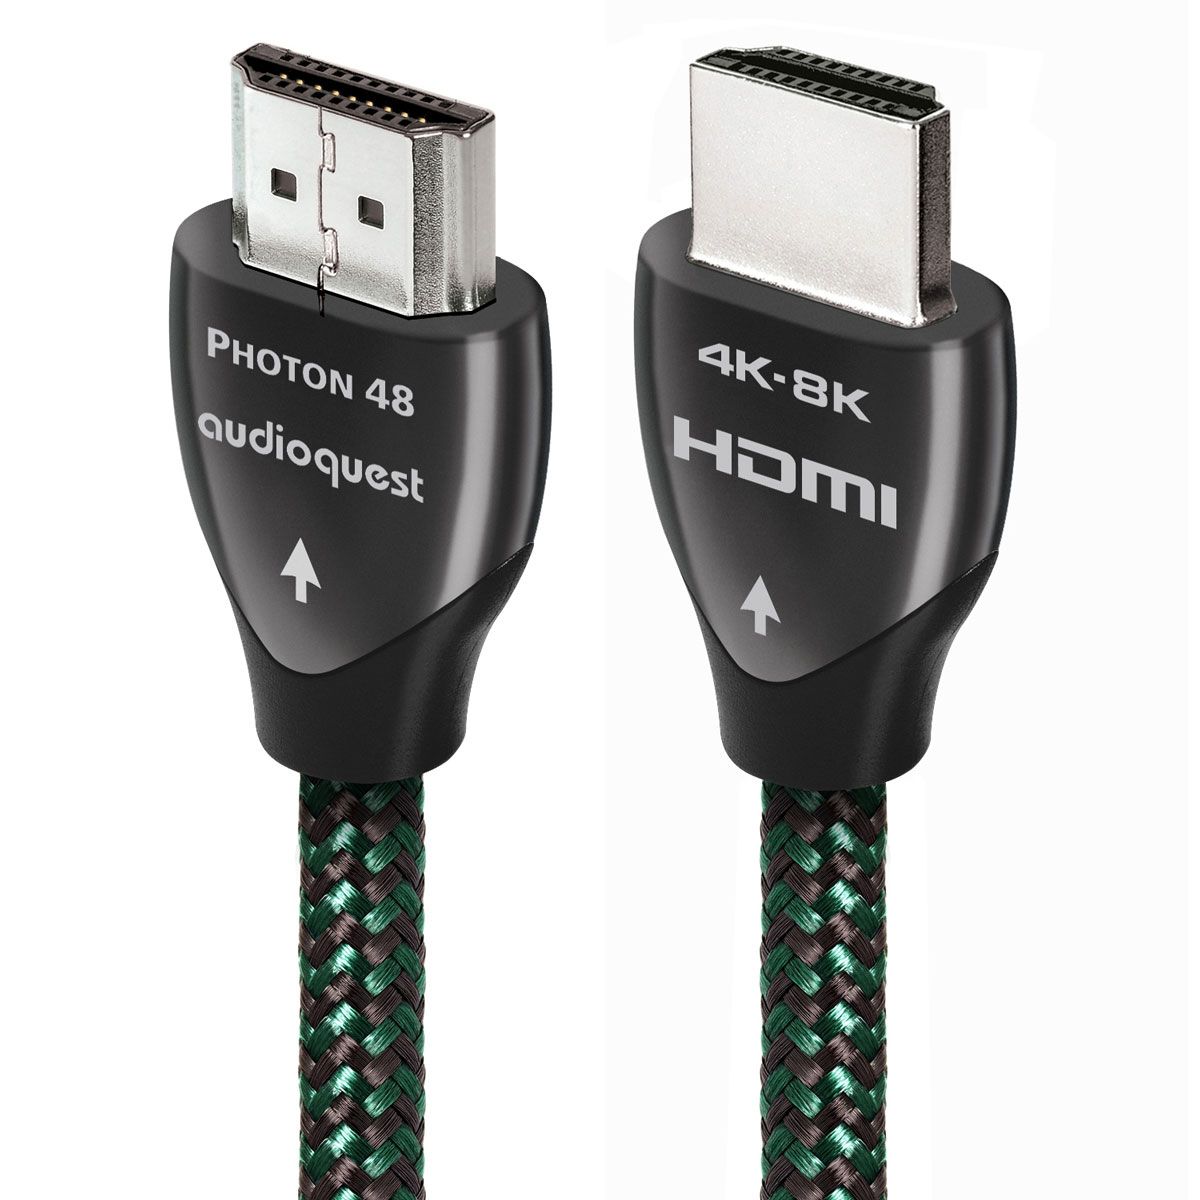 AudioQuest Photon 48 4K-8K HDMI Cable, view of both ends